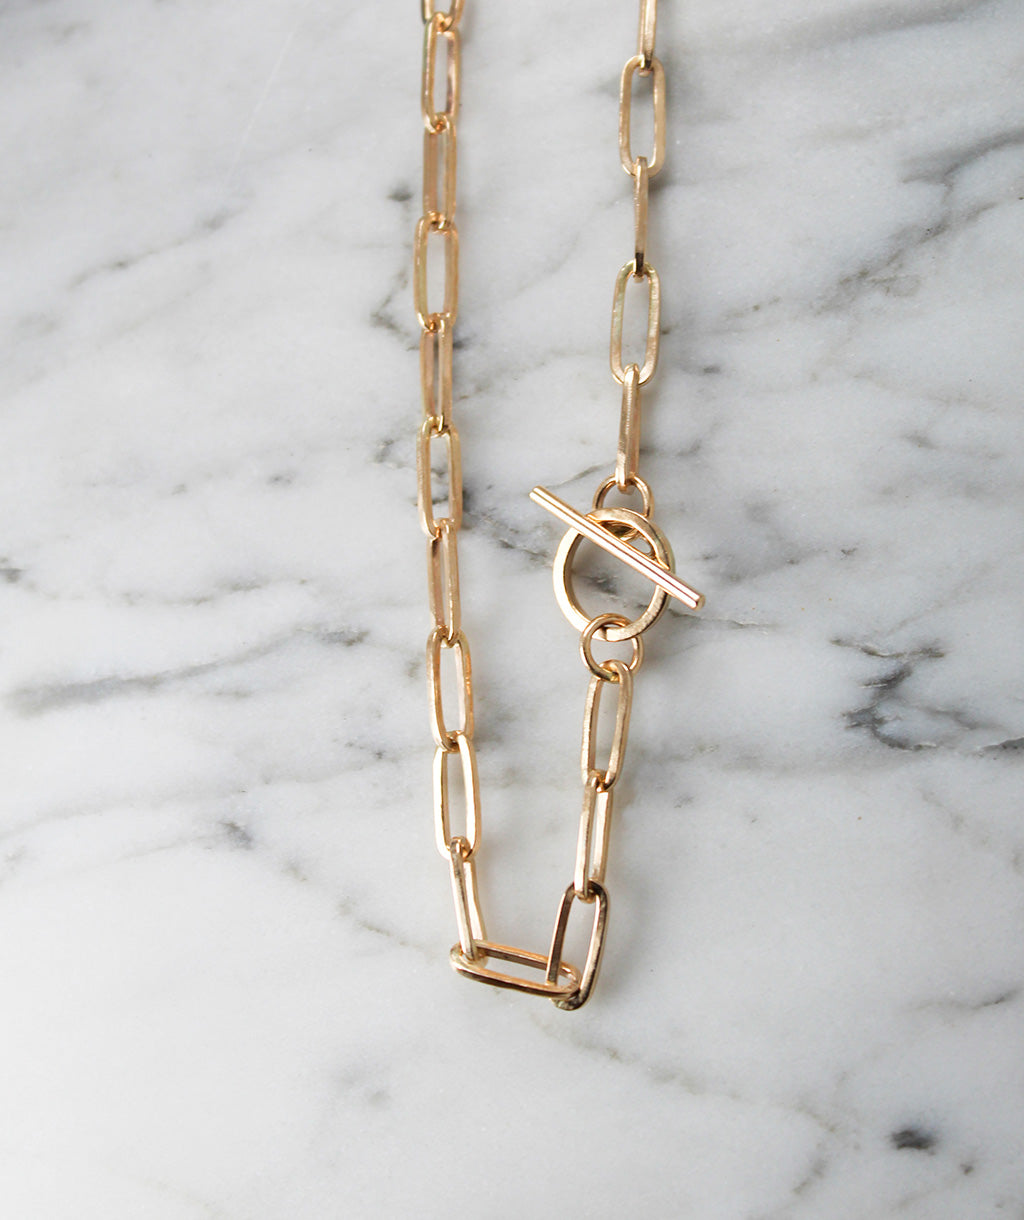 Hand Built Paper Clip Chain in 14K Gold Fill